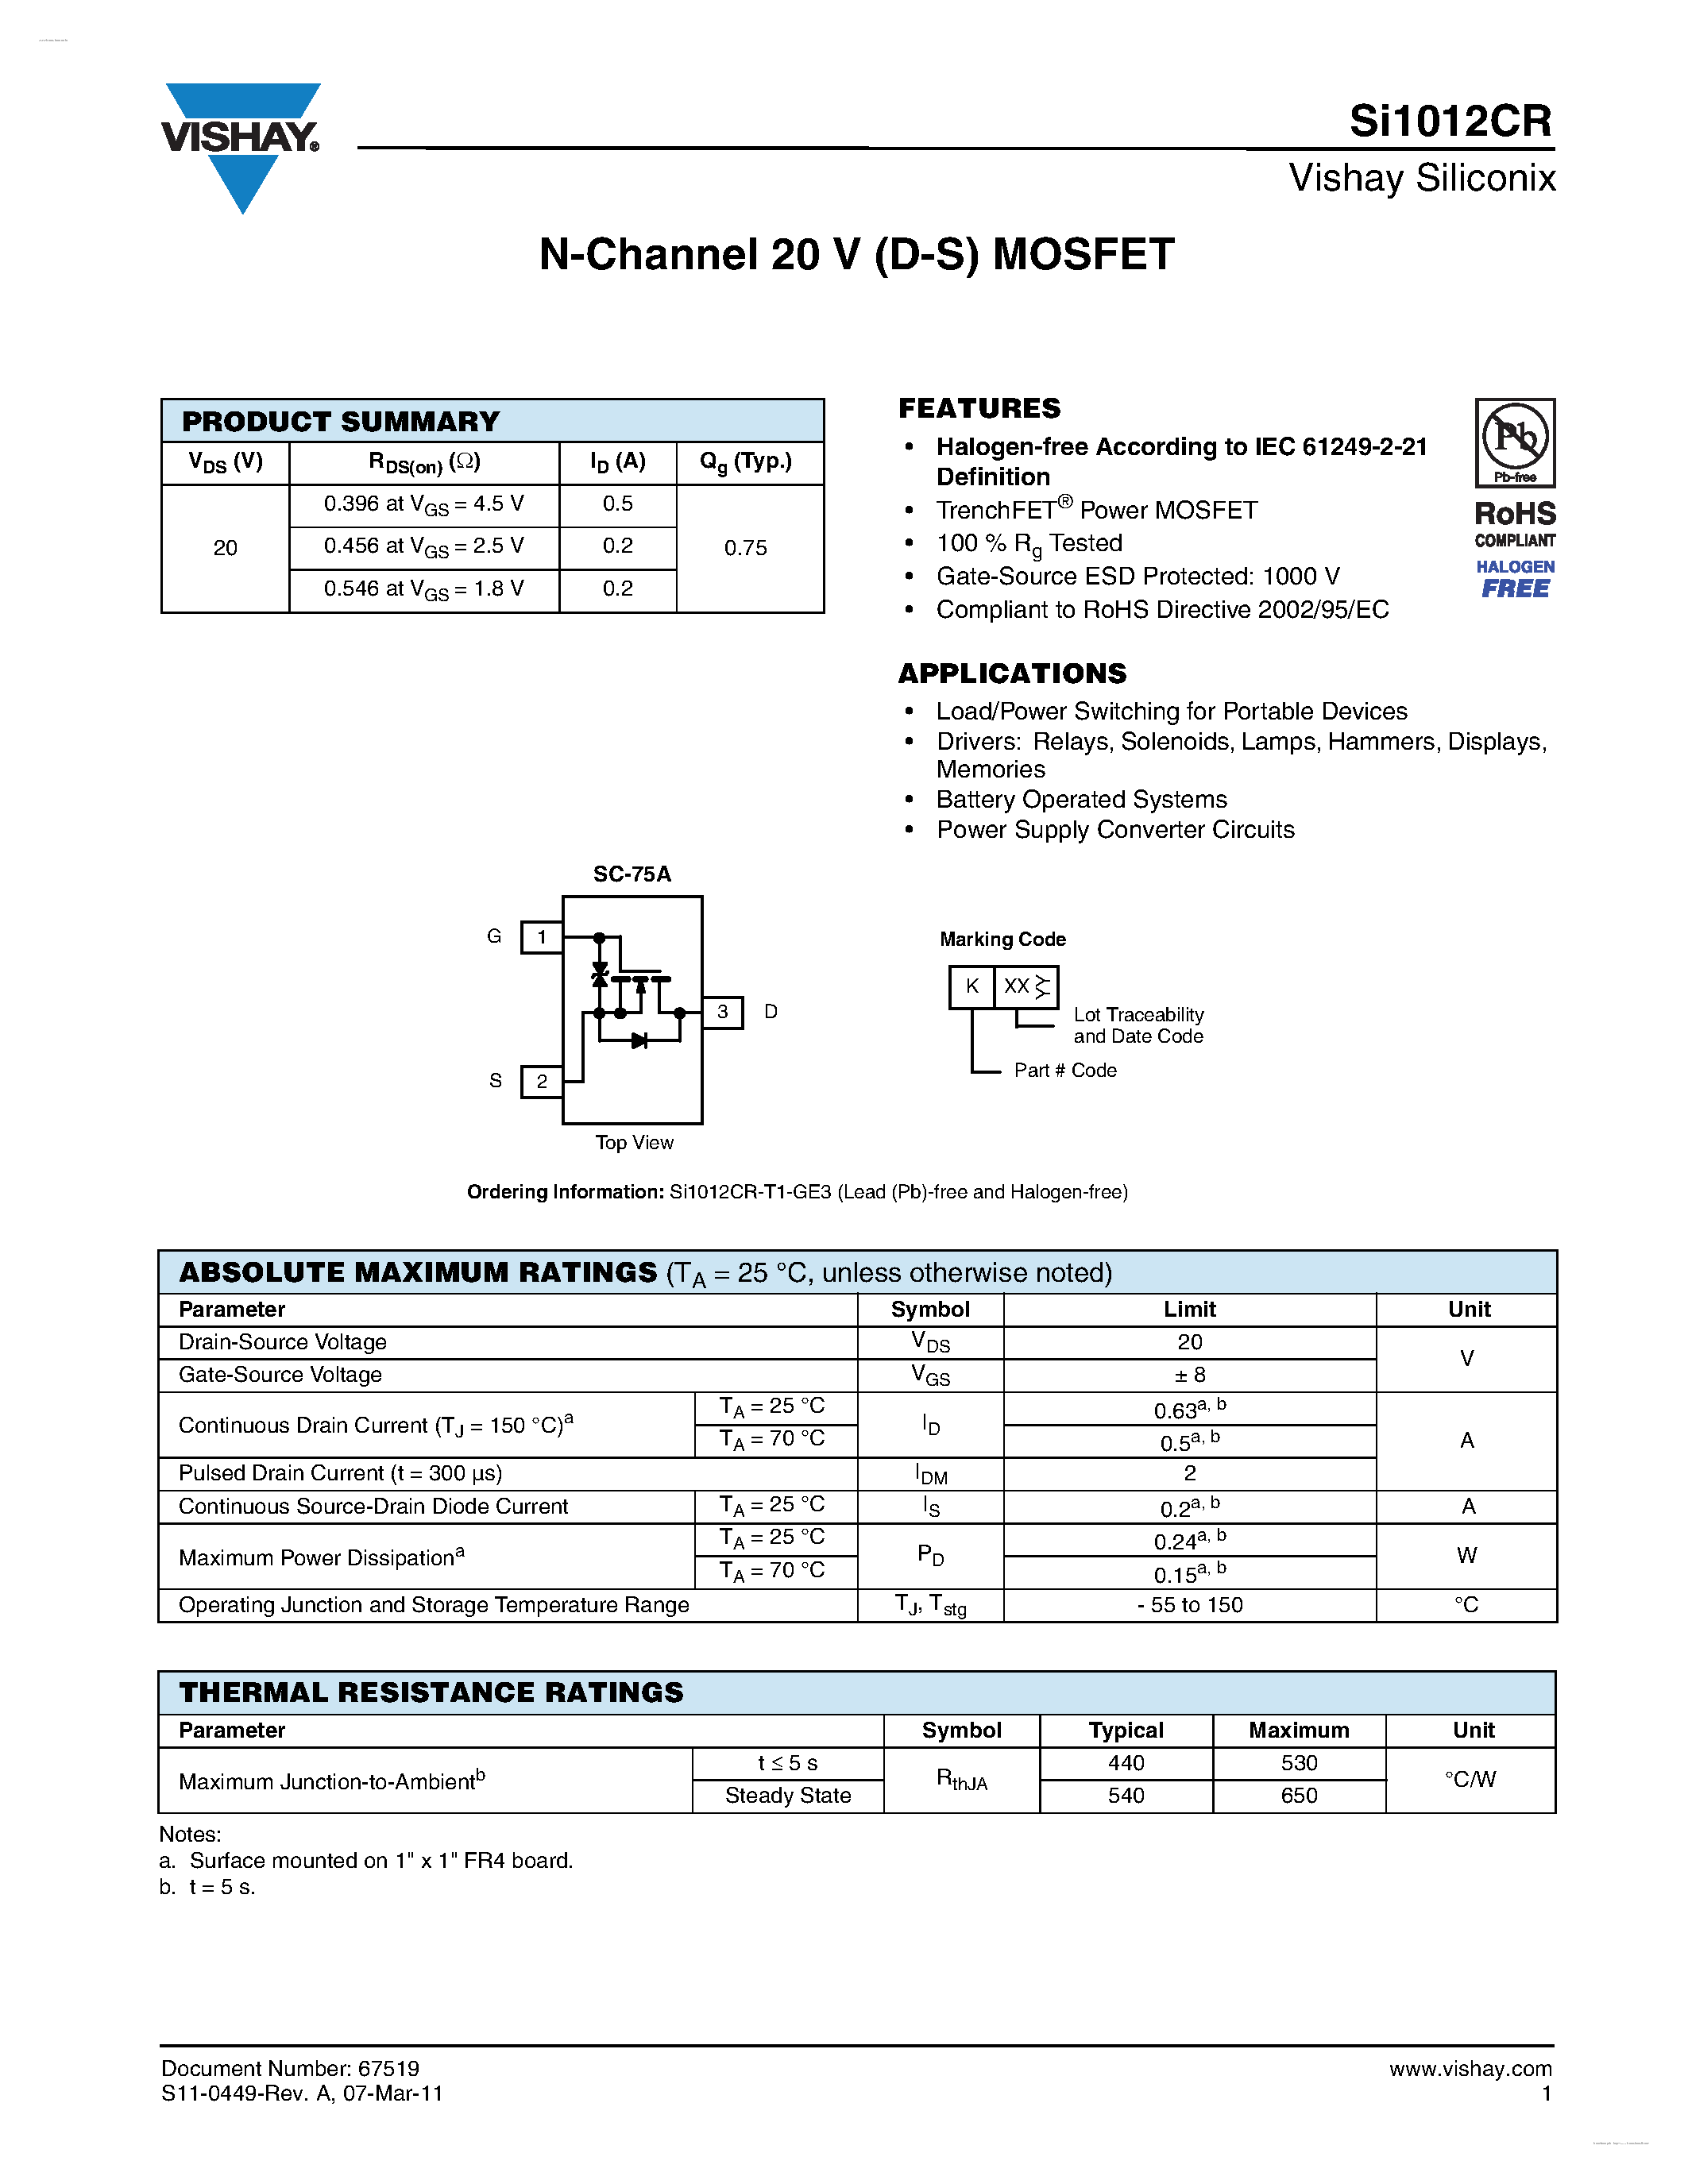 Datasheet SI1012CR - N-Channel 20 V (D-S) MOSFET page 1